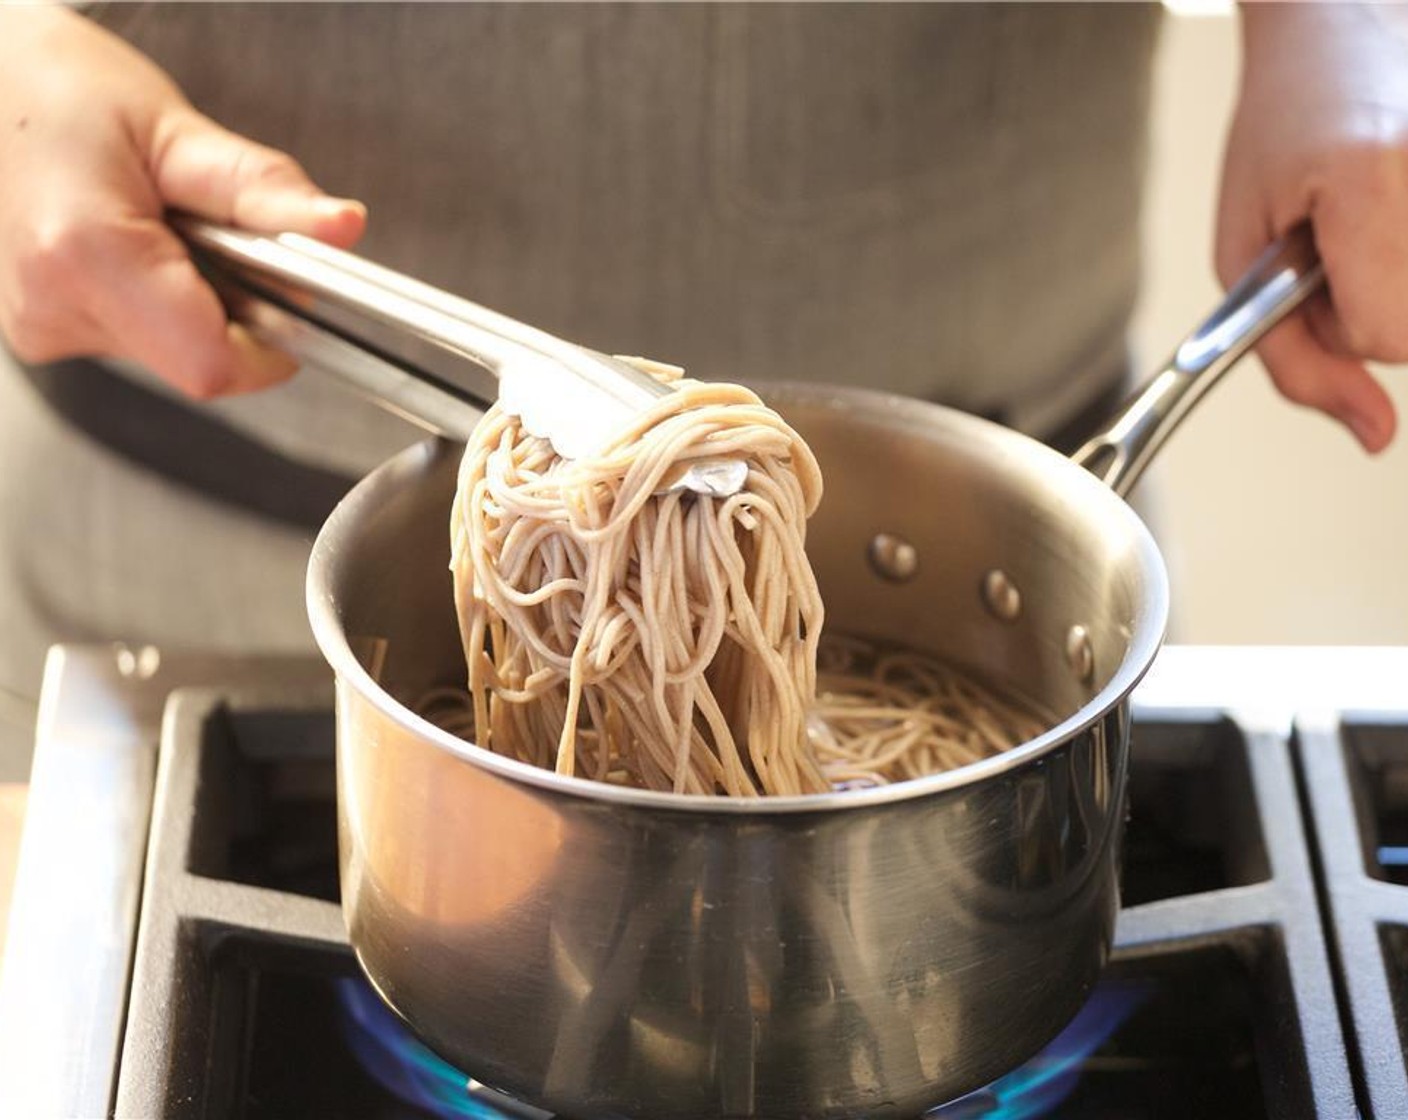 step 4 Drain in a colander and rinse very well with cold water for one minute until noodles are cold and starch is rinsed away. Drain well so noodles are not wet. Place in a large bowl and set aside.